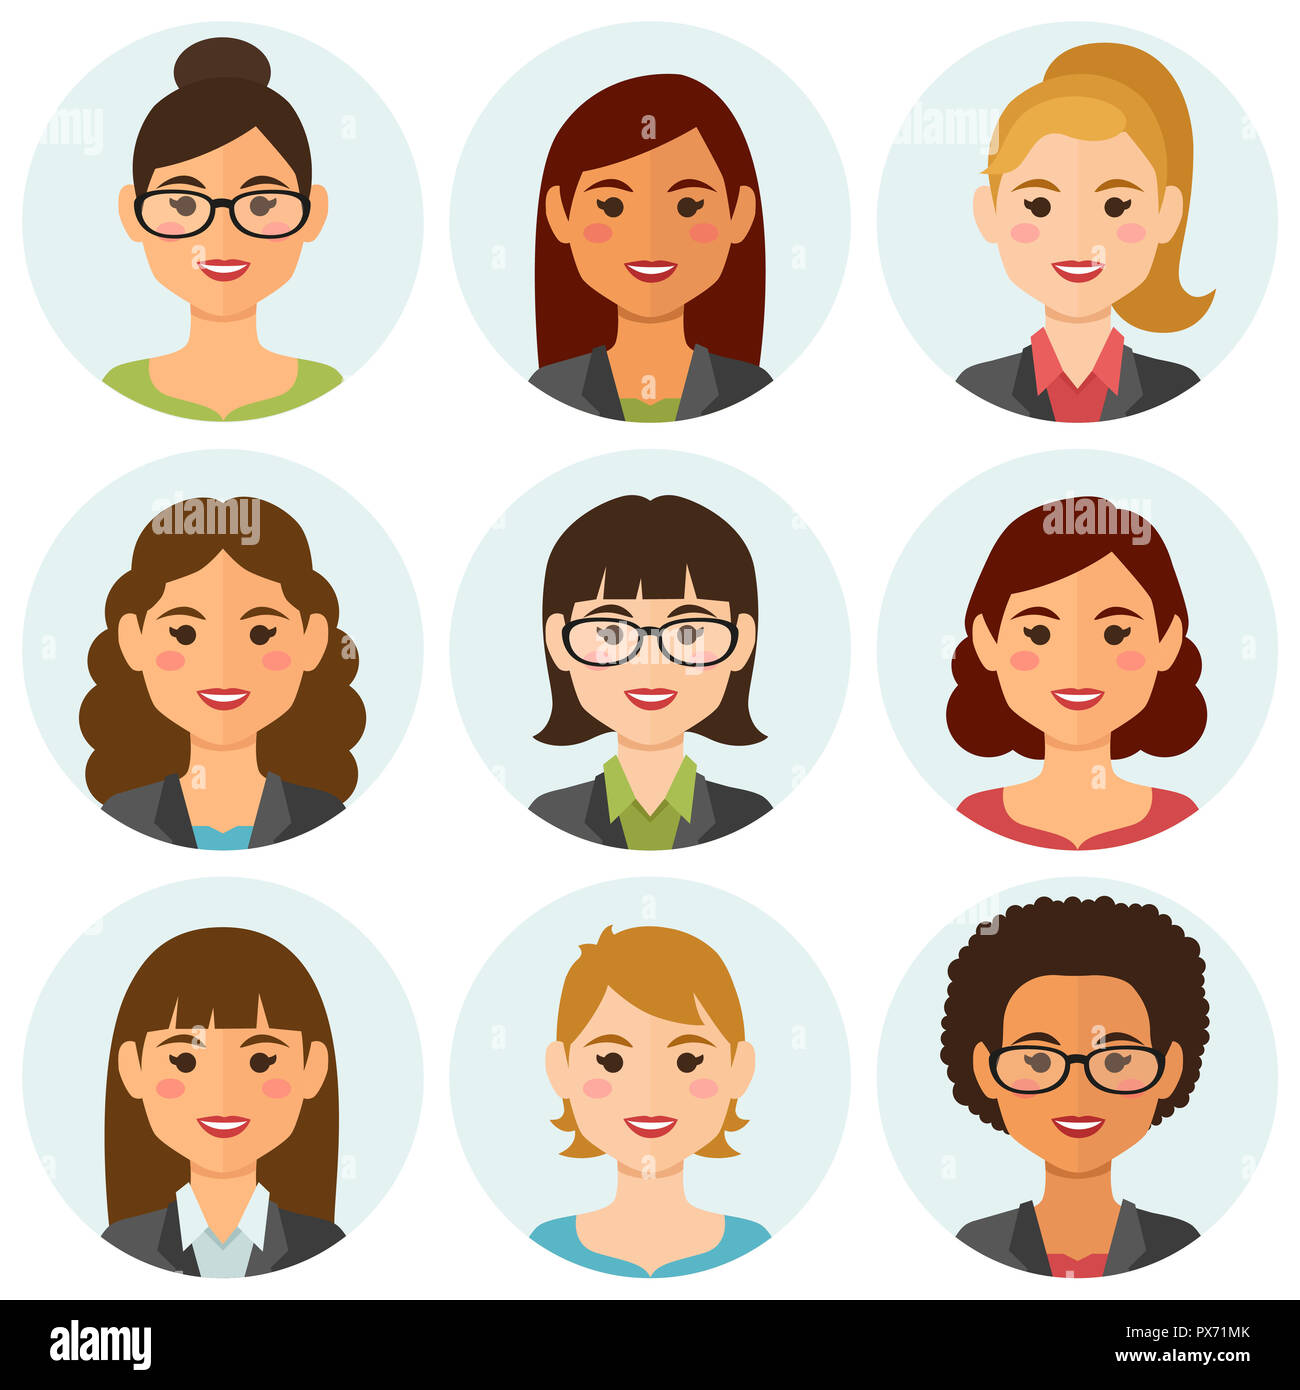 Business women flat avatars set with smiling face. Team icons collection. Vector illustration. Stock Photo